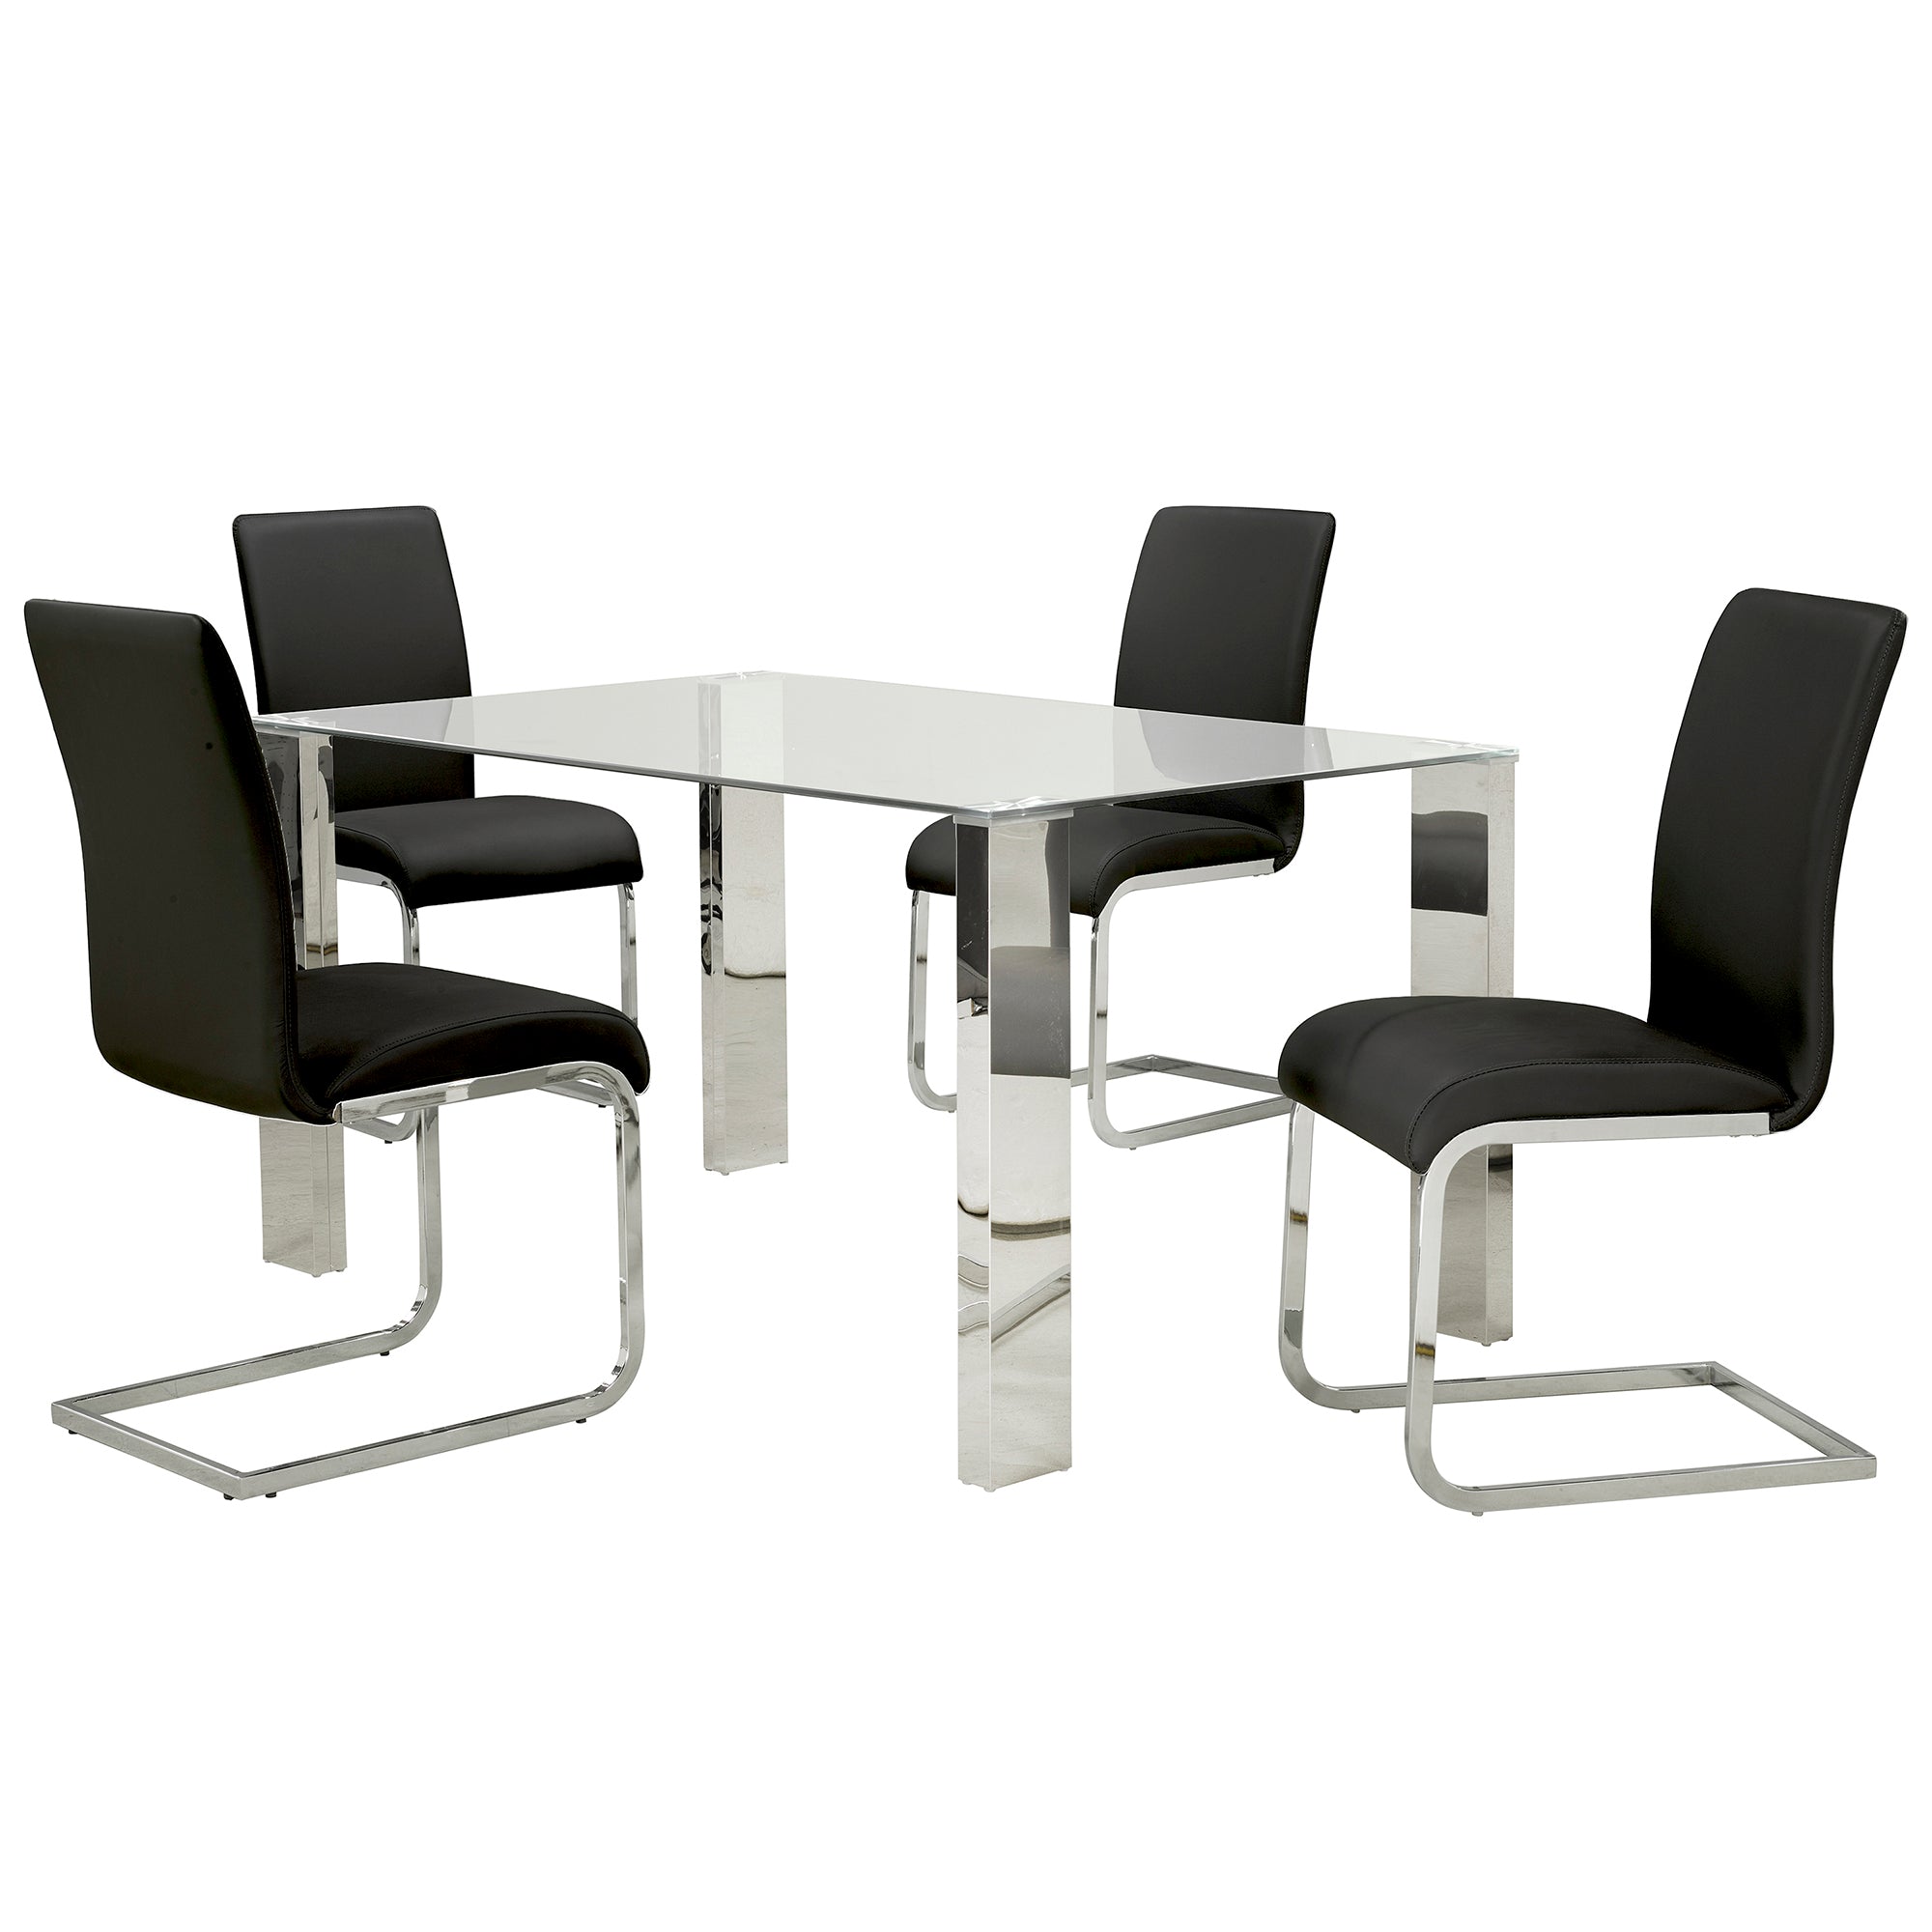 FRANKFURT 55" DINING TABLE-STAINLESS STEEL & GLASS / MAXIM BLACK CHAIRS - 5PC DINING SET